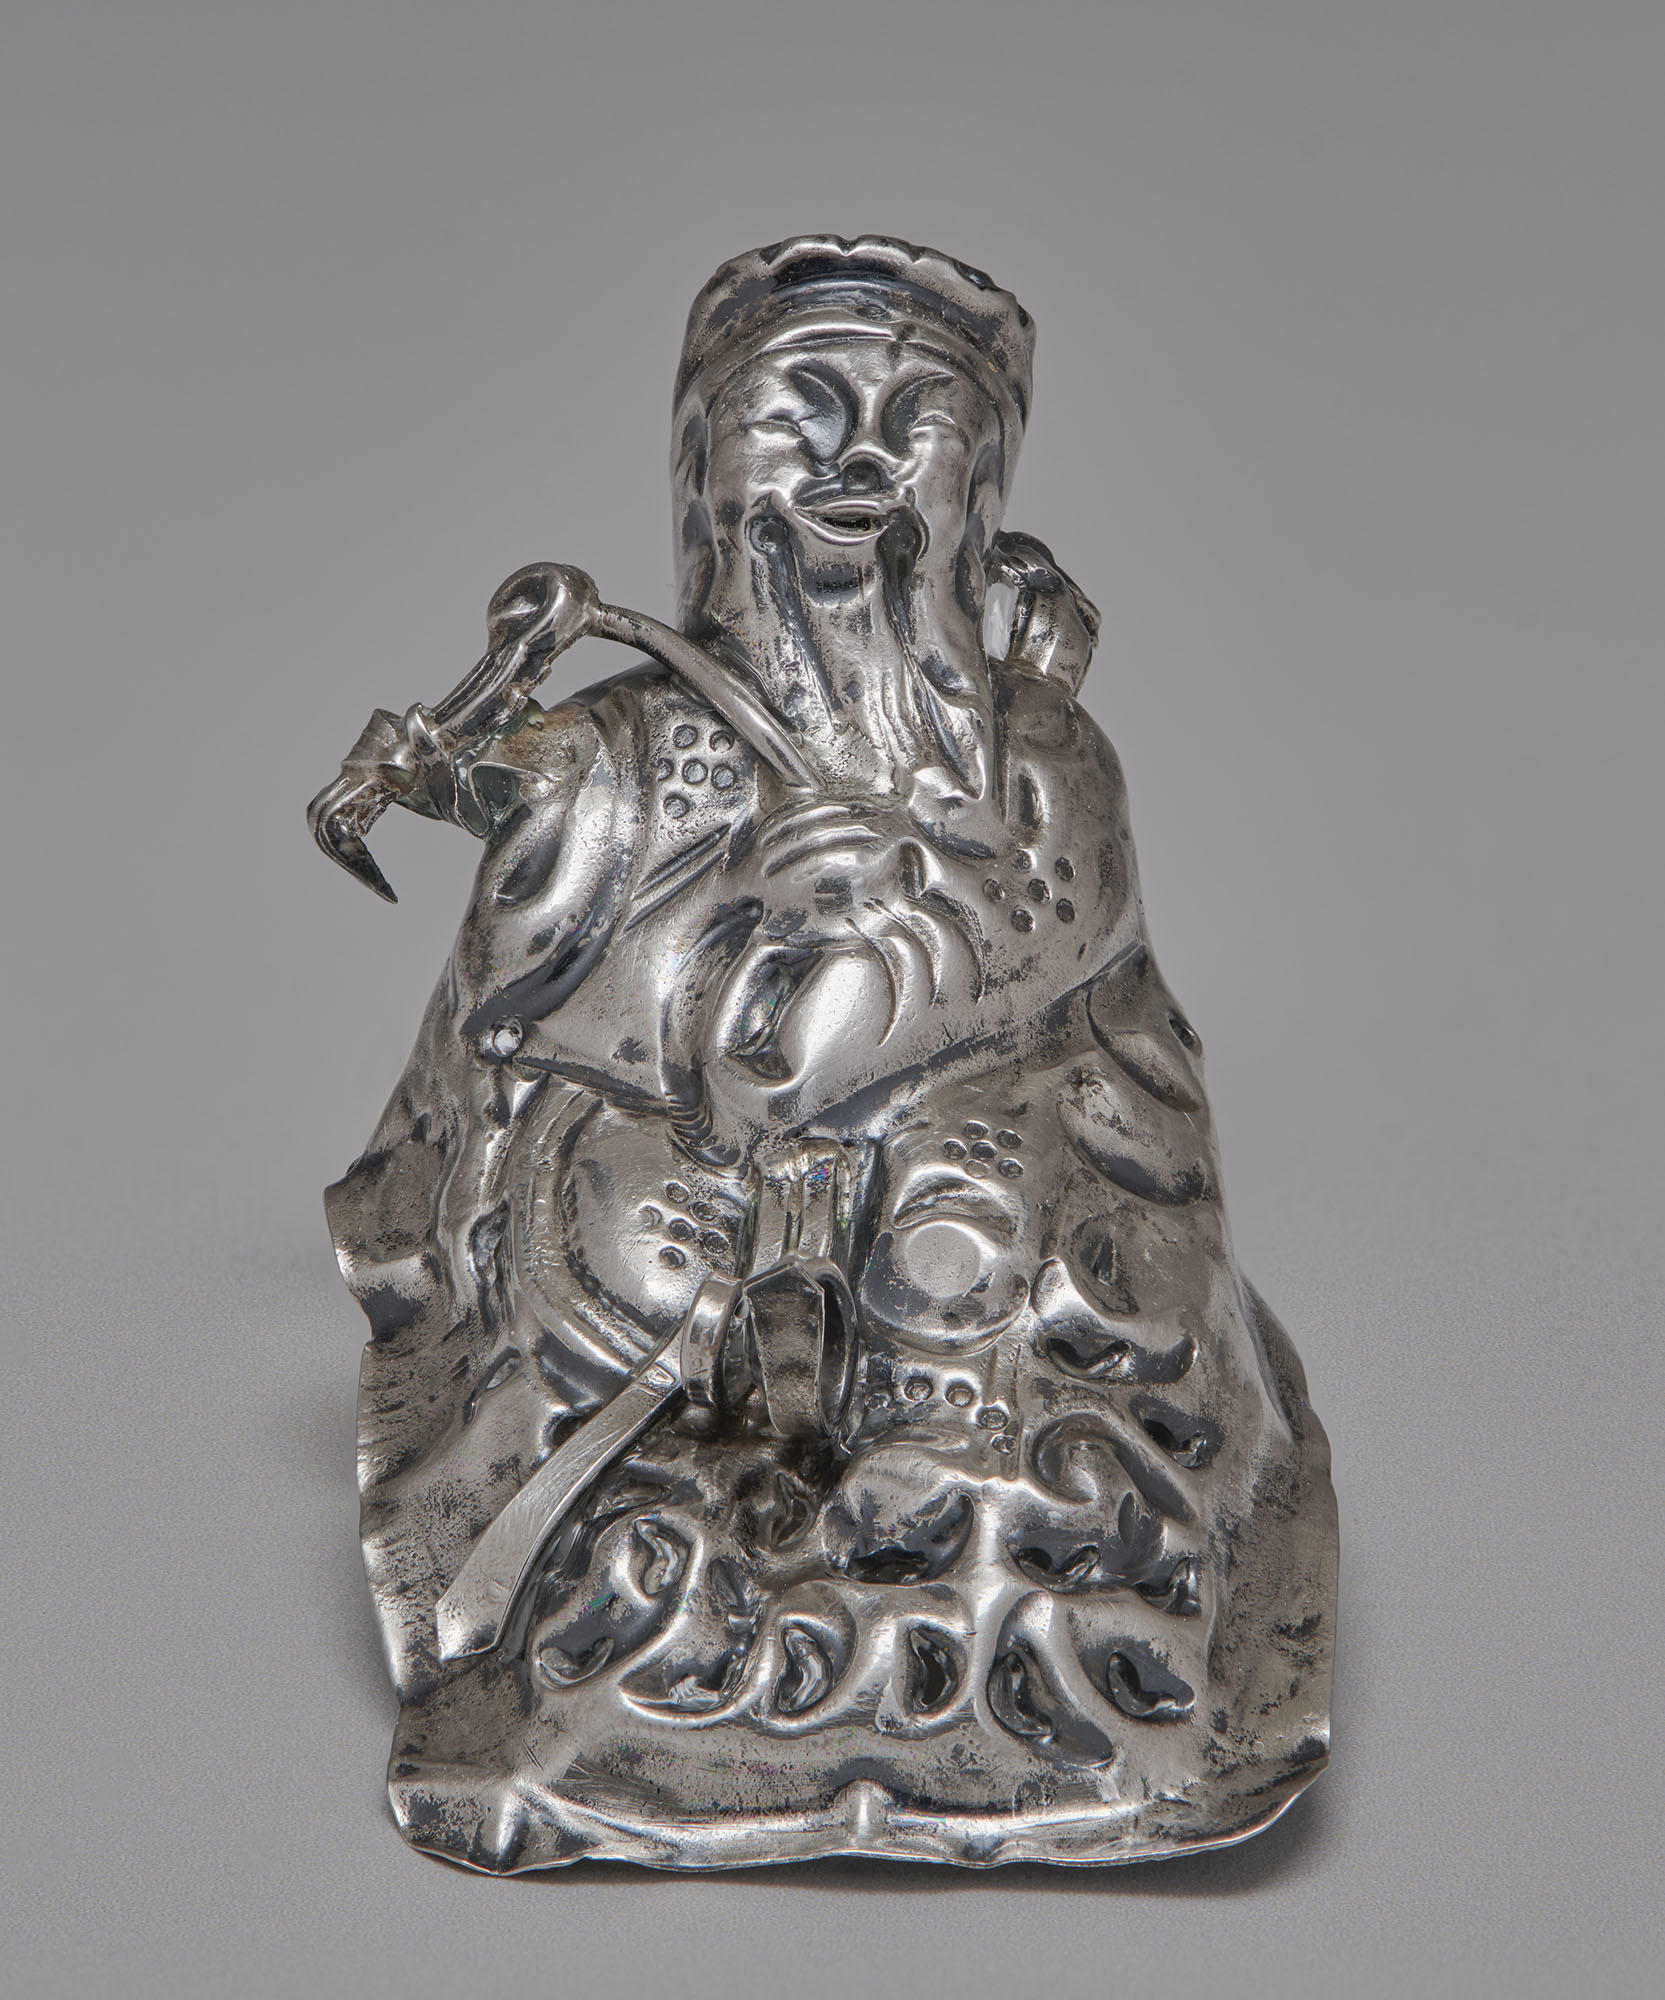 A clean silver object with a high relief design of a figure wearing a robe and headdress shown after conservation at the Isabella Stewart Gardner Museum.